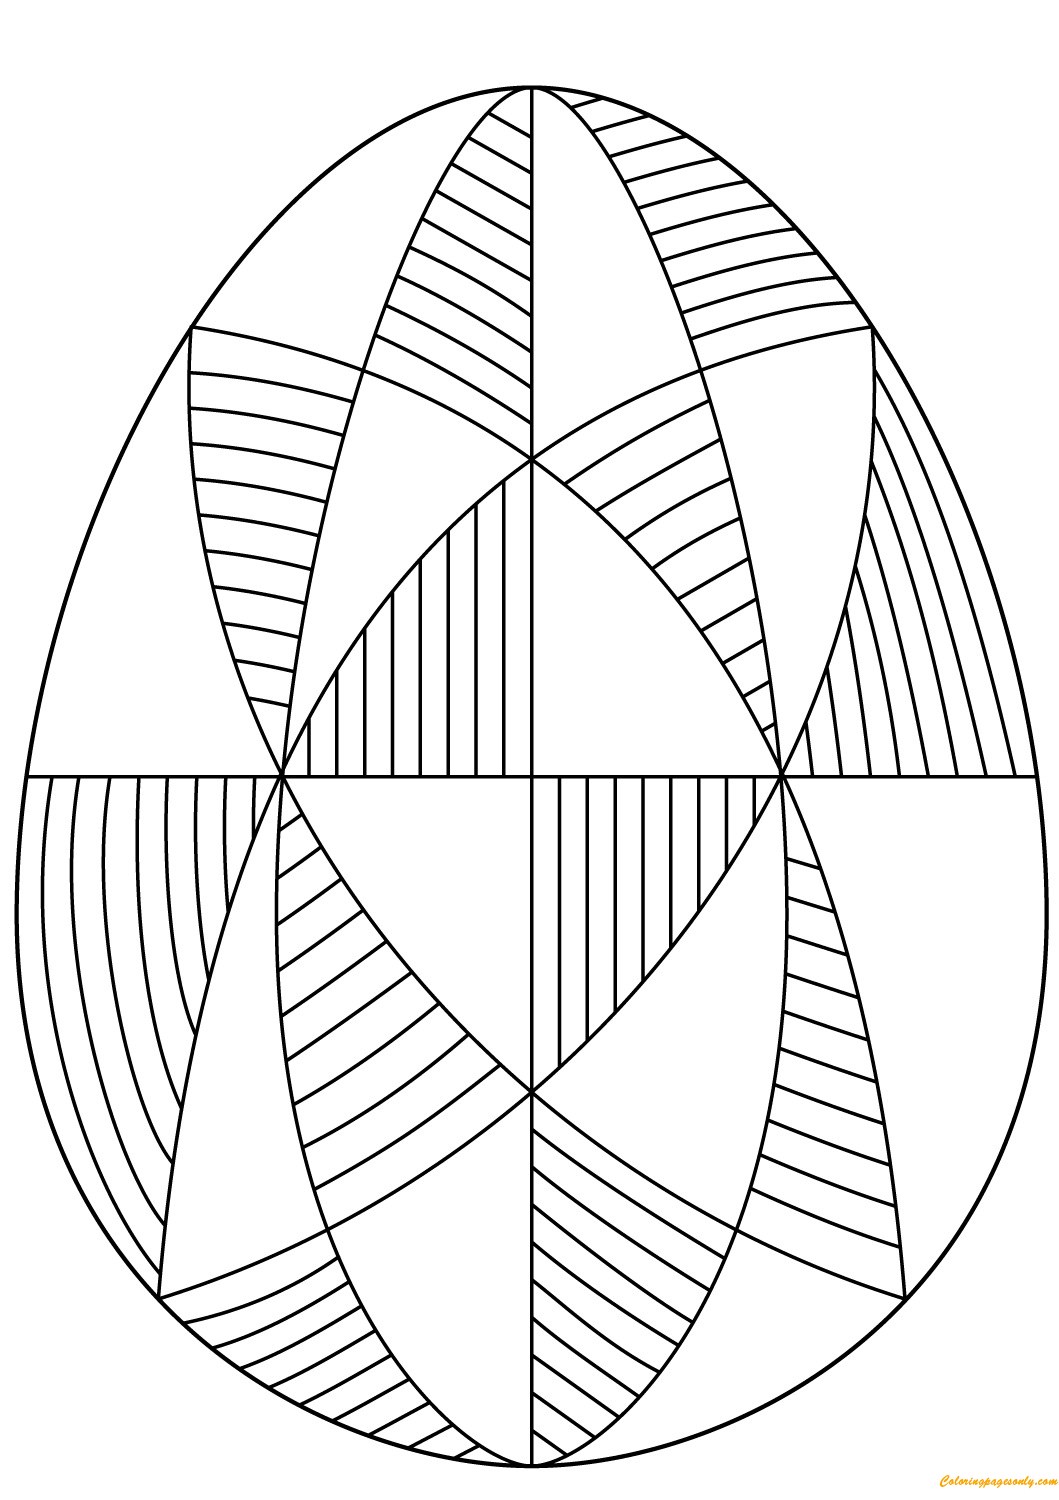 Decorative Easter Egg Spiral Pattern Coloring Page - Free Coloring ...